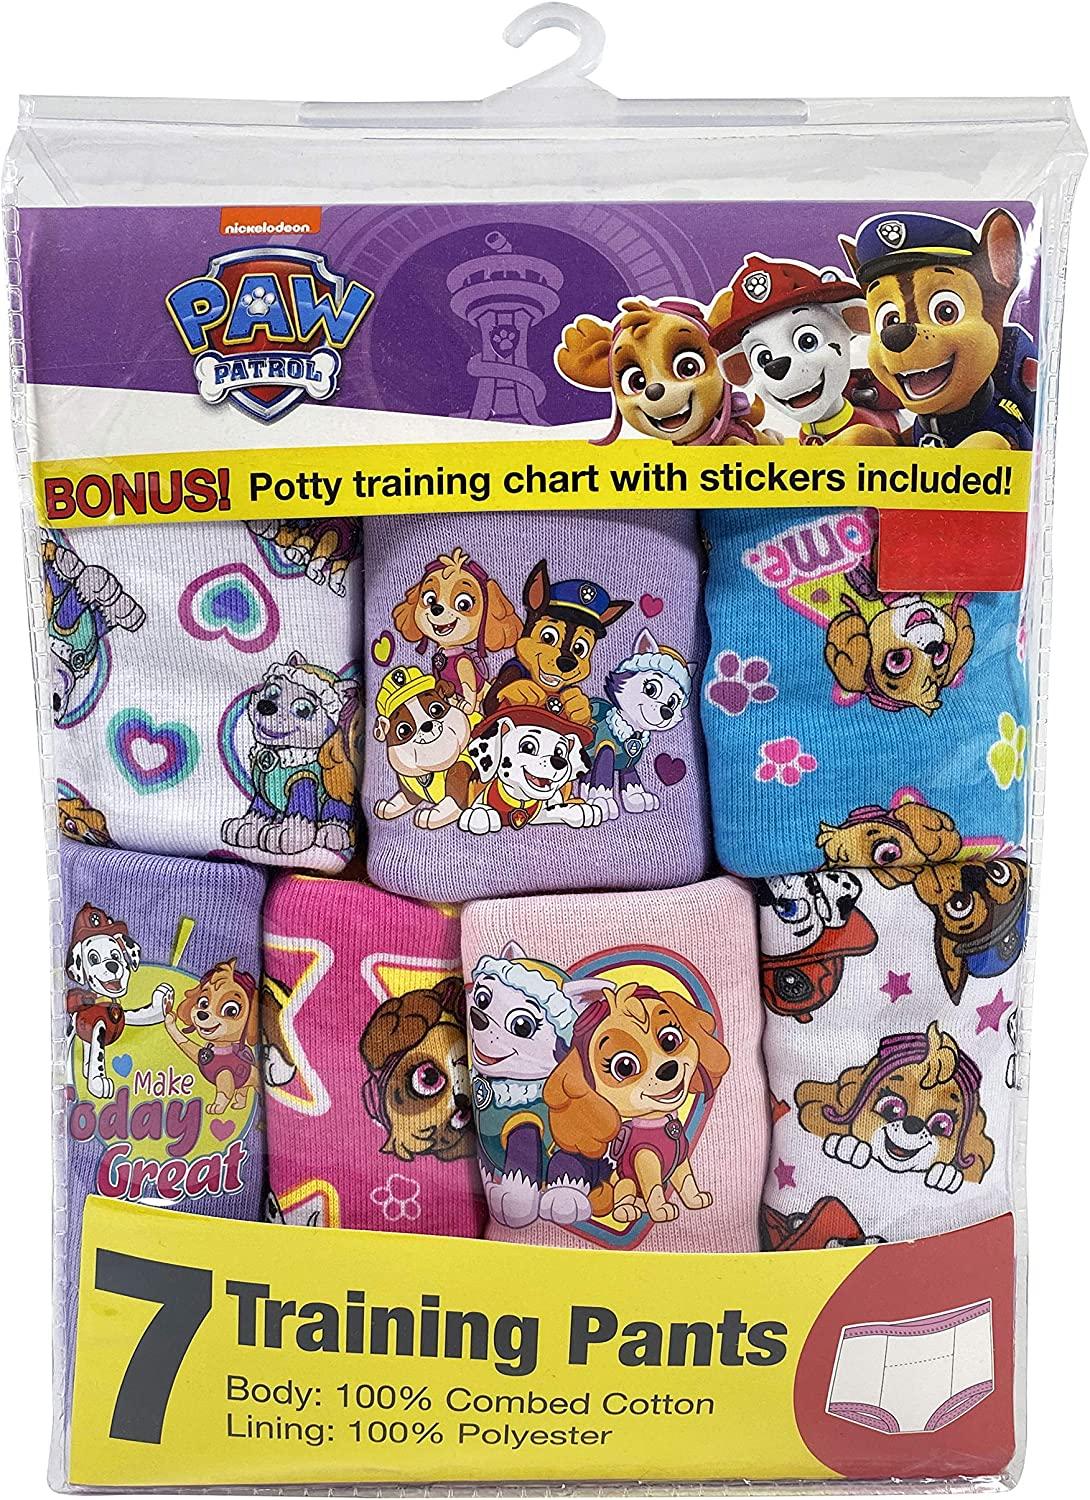 Buy Girls' Toddler Potty Training Pants with Chase, Skye & More